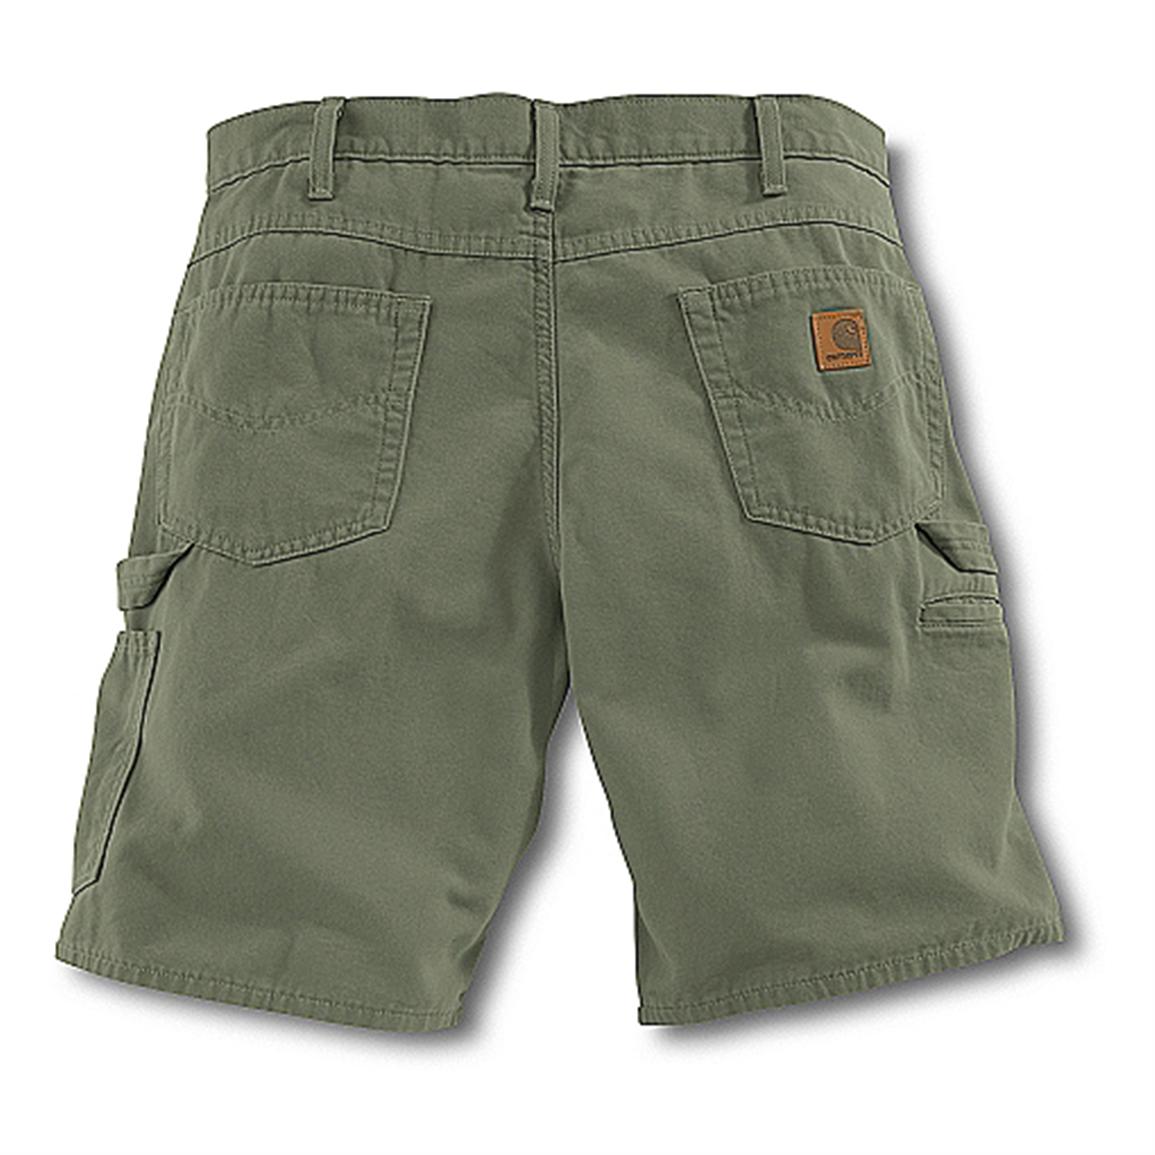 Men's Carhartt® Canvas Utility Shorts - 200477, Shorts at Sportsman's Guide